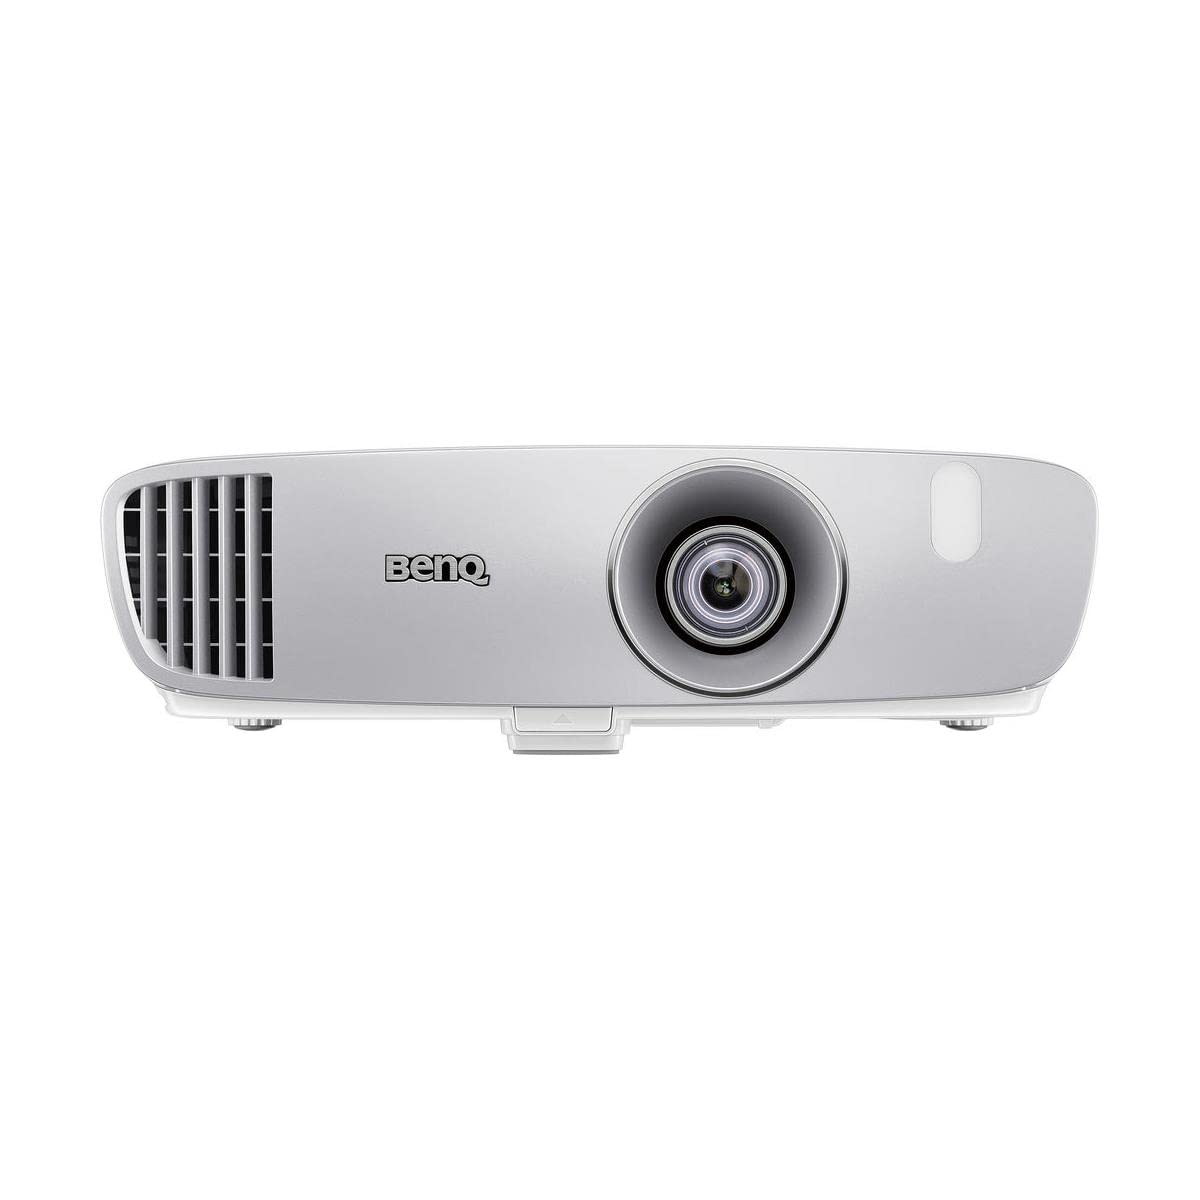 BenQ HT2050A 1080P Home Theater Projector | 2200 Lumens | 96% Rec.709 for Accurate Colors | Low Input Lag Ideal for Gaming | 2D Keystone for Flexible Setup